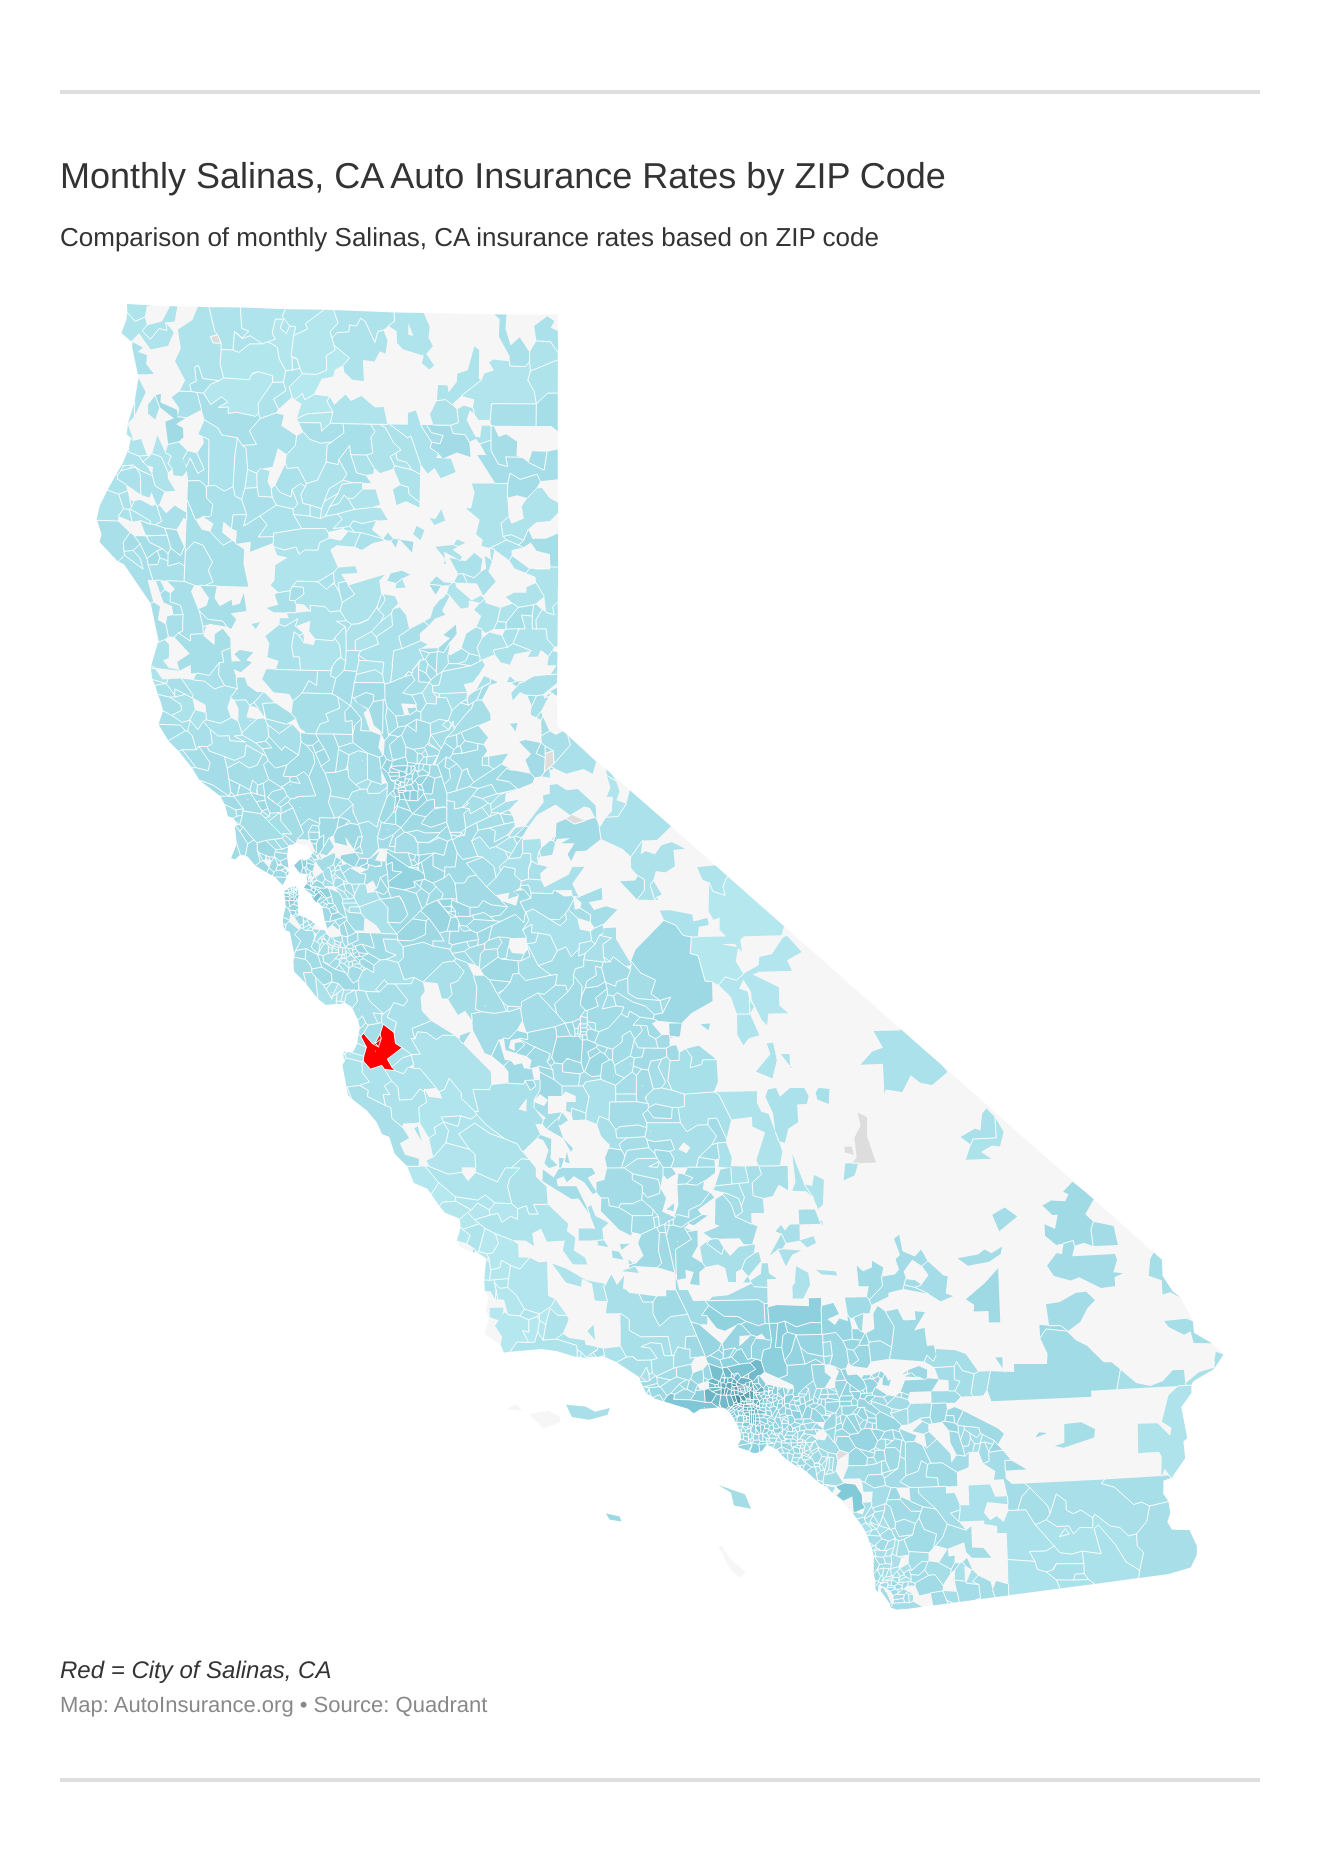 Monthly Salinas, CA Auto Insurance Rates by ZIP Code